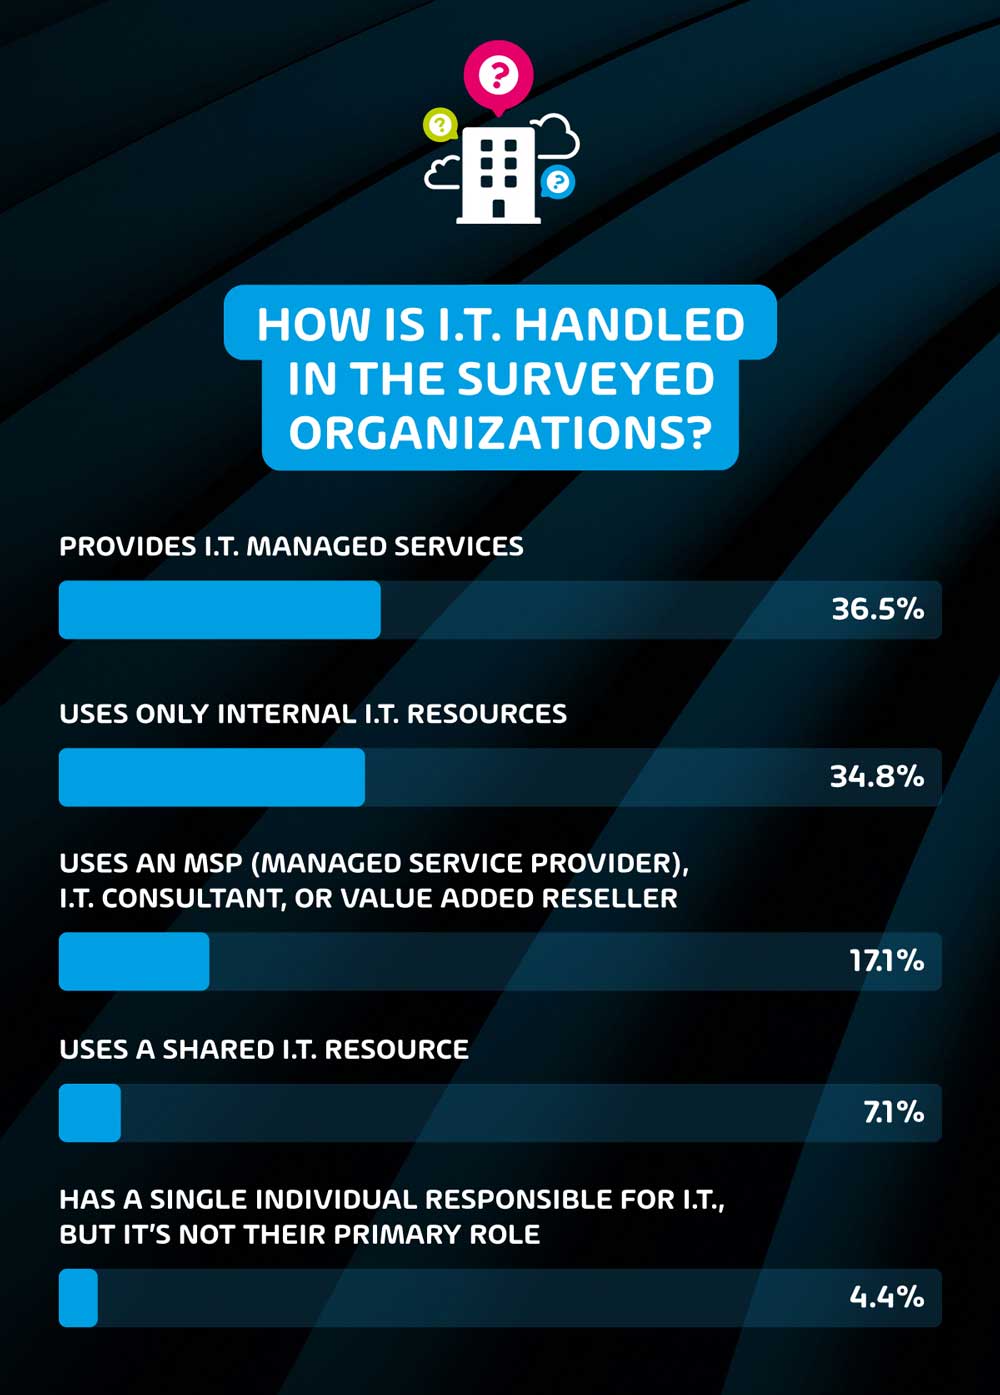 How is I.T. handled in the surveyed Organizations